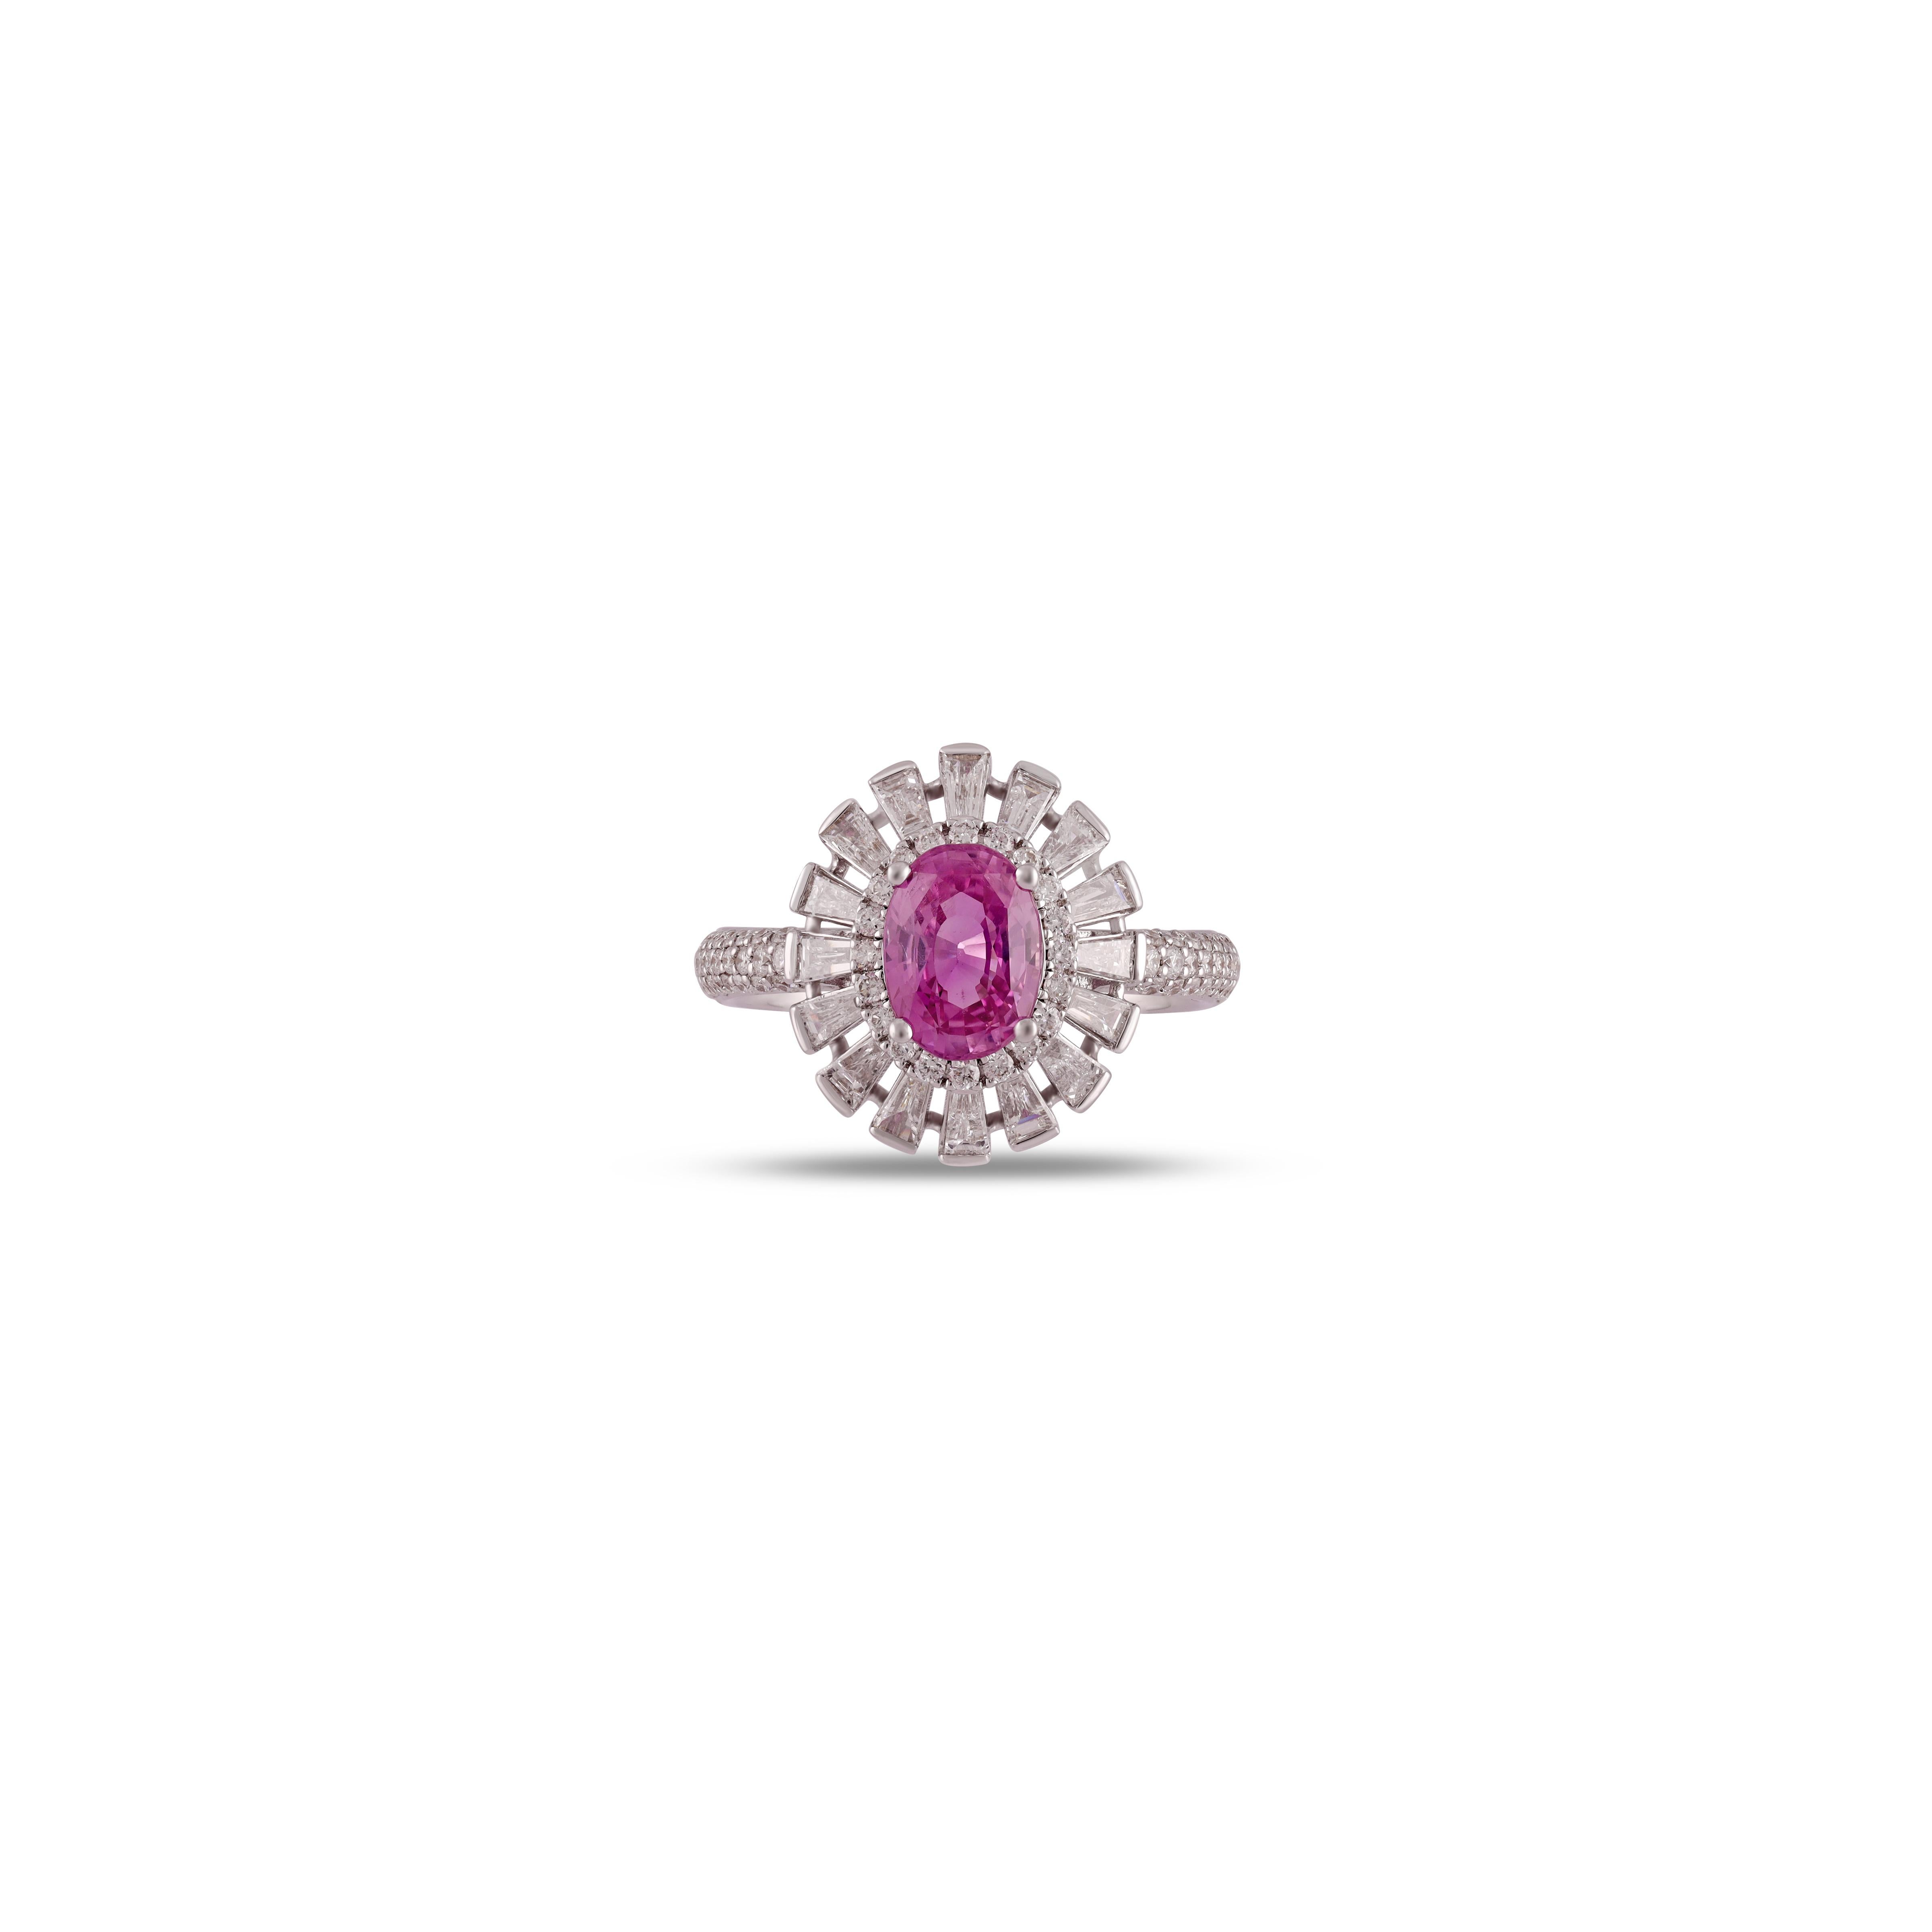 Natural Pink Sapphire Surrounded By Diamonds Finish in 18k Gold Ring


Diamond - 1.03 CTS
Natural Pink Sapphire - 1.65 CTS

 Finish in 18k Gold

Custom Services
Resizing is available.
Request Customization

size - 6.5




